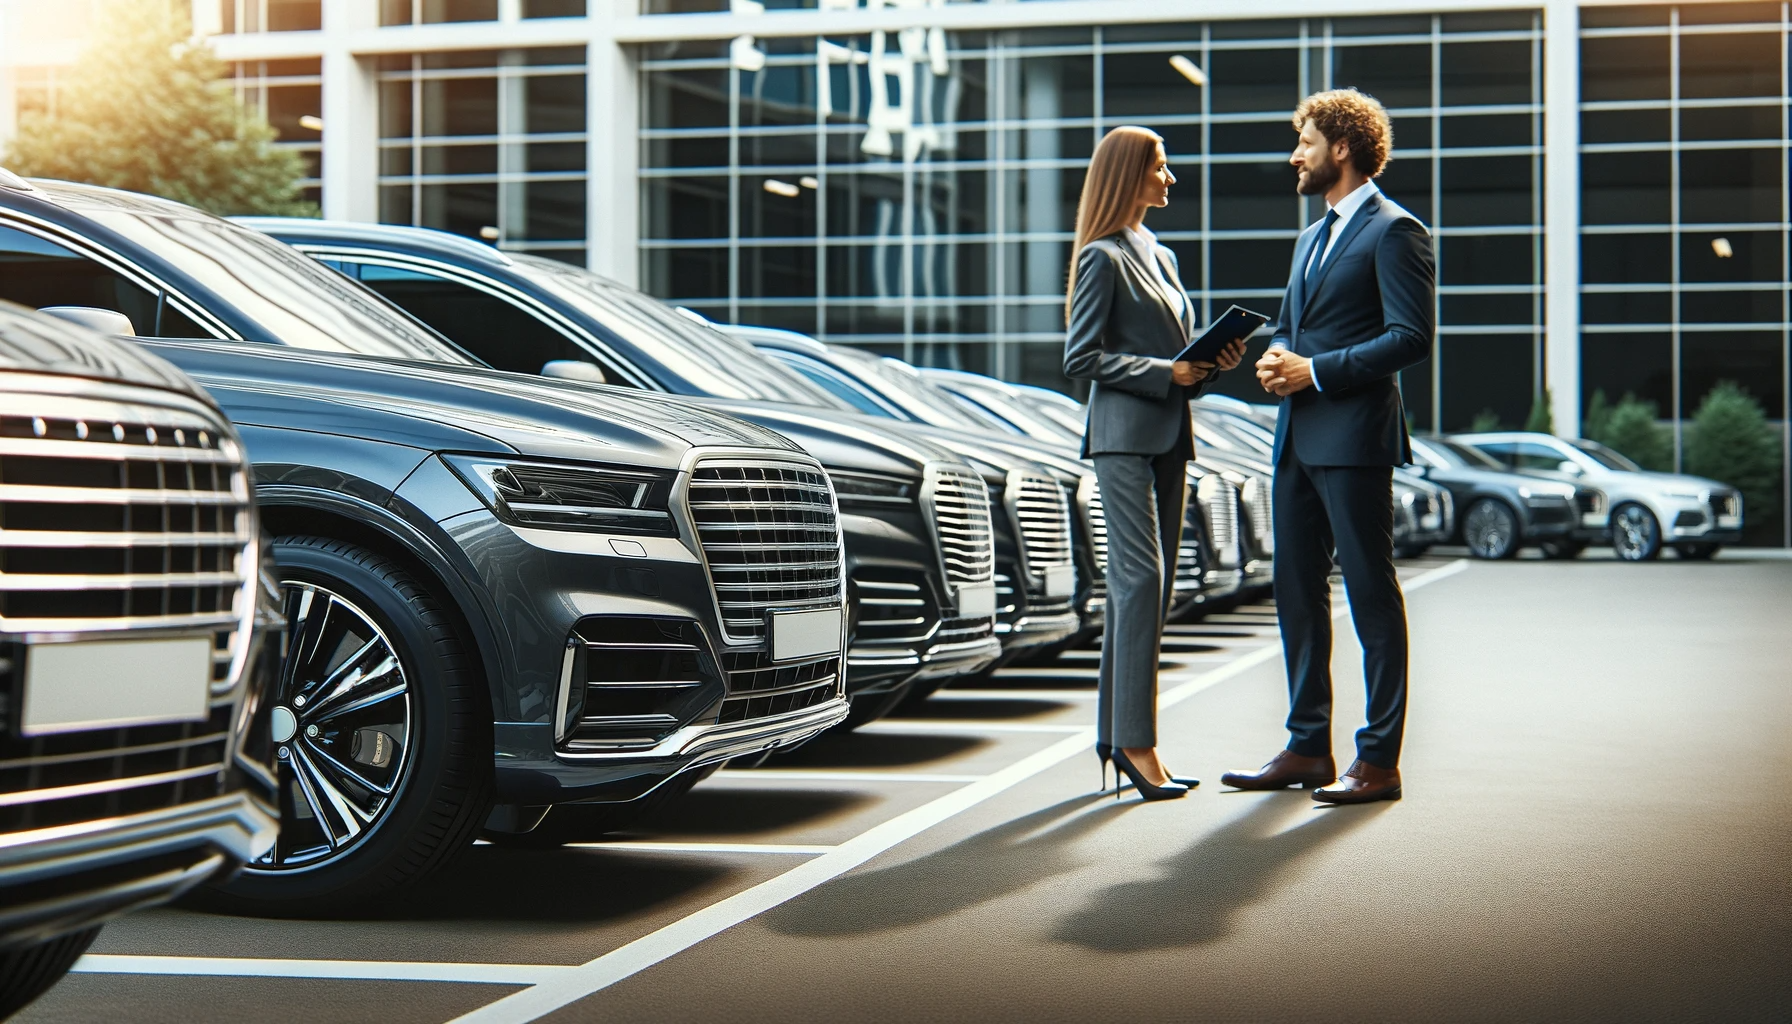 blog item card - Discover the pros and cons of buying or leasing a company car. Which is better for an SME? More about financial and tax advantages in the gowago.ch blog!